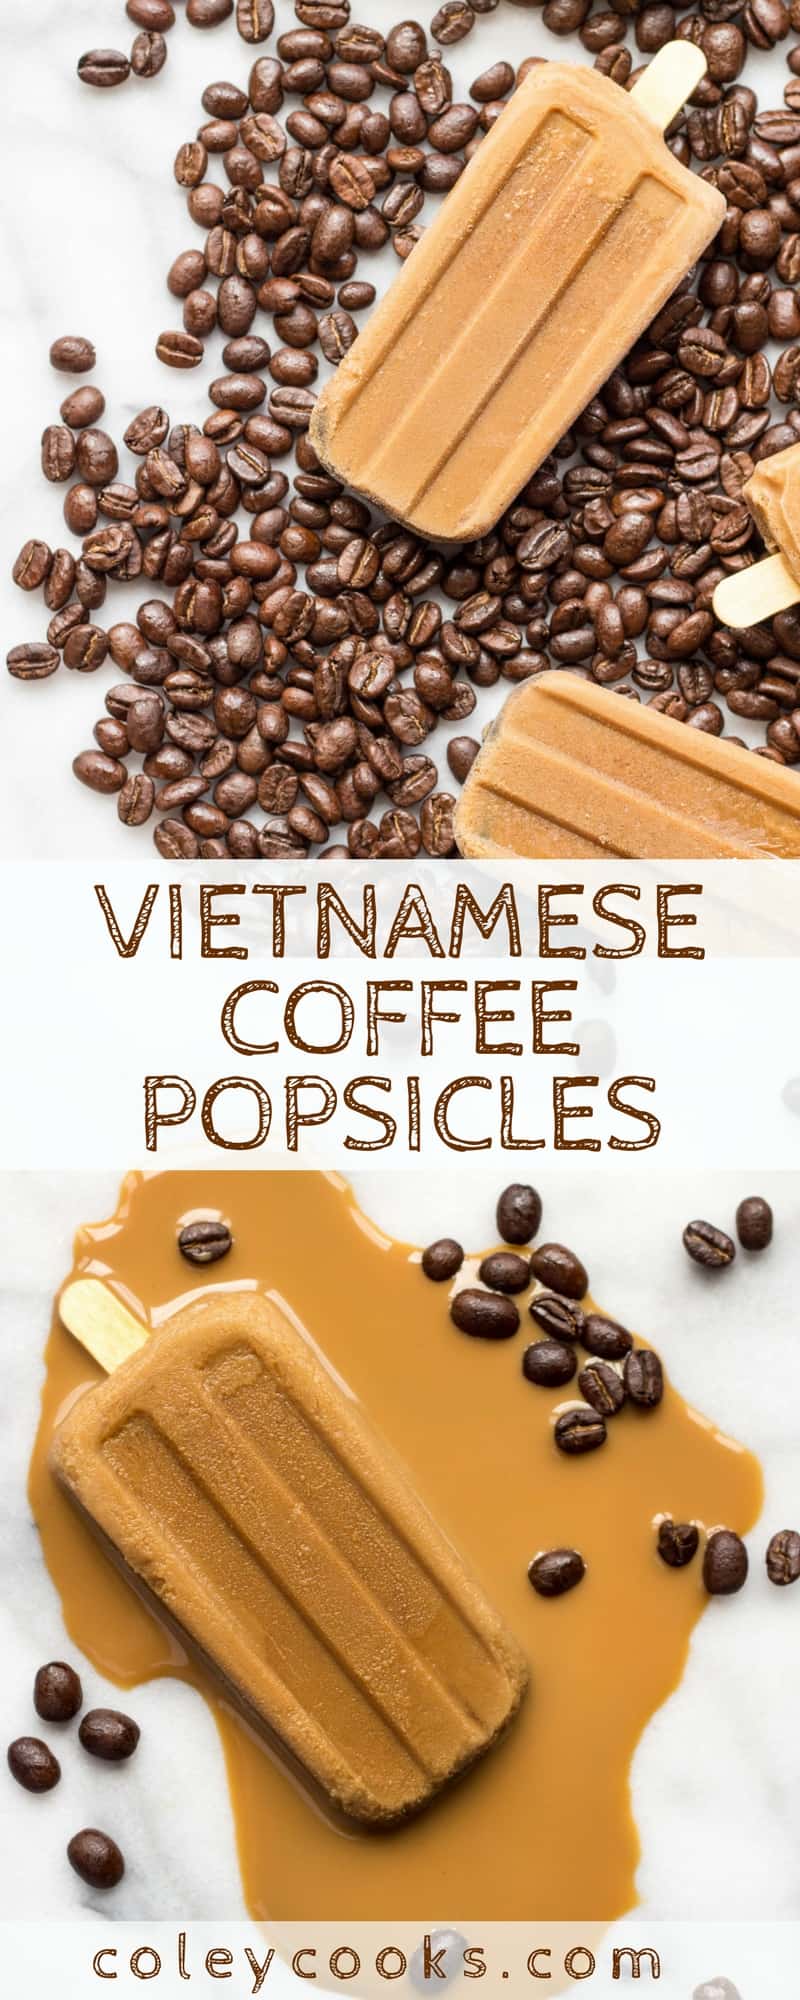 VIETNAMESE COFFEE POPSICLES | This easy recipe for Vietnamese Coffee Popsicles is made with super strong Vietnamese chicory coffee! Awesome frozen treat on a hot summer day. | ColeyCooks.com.jpg